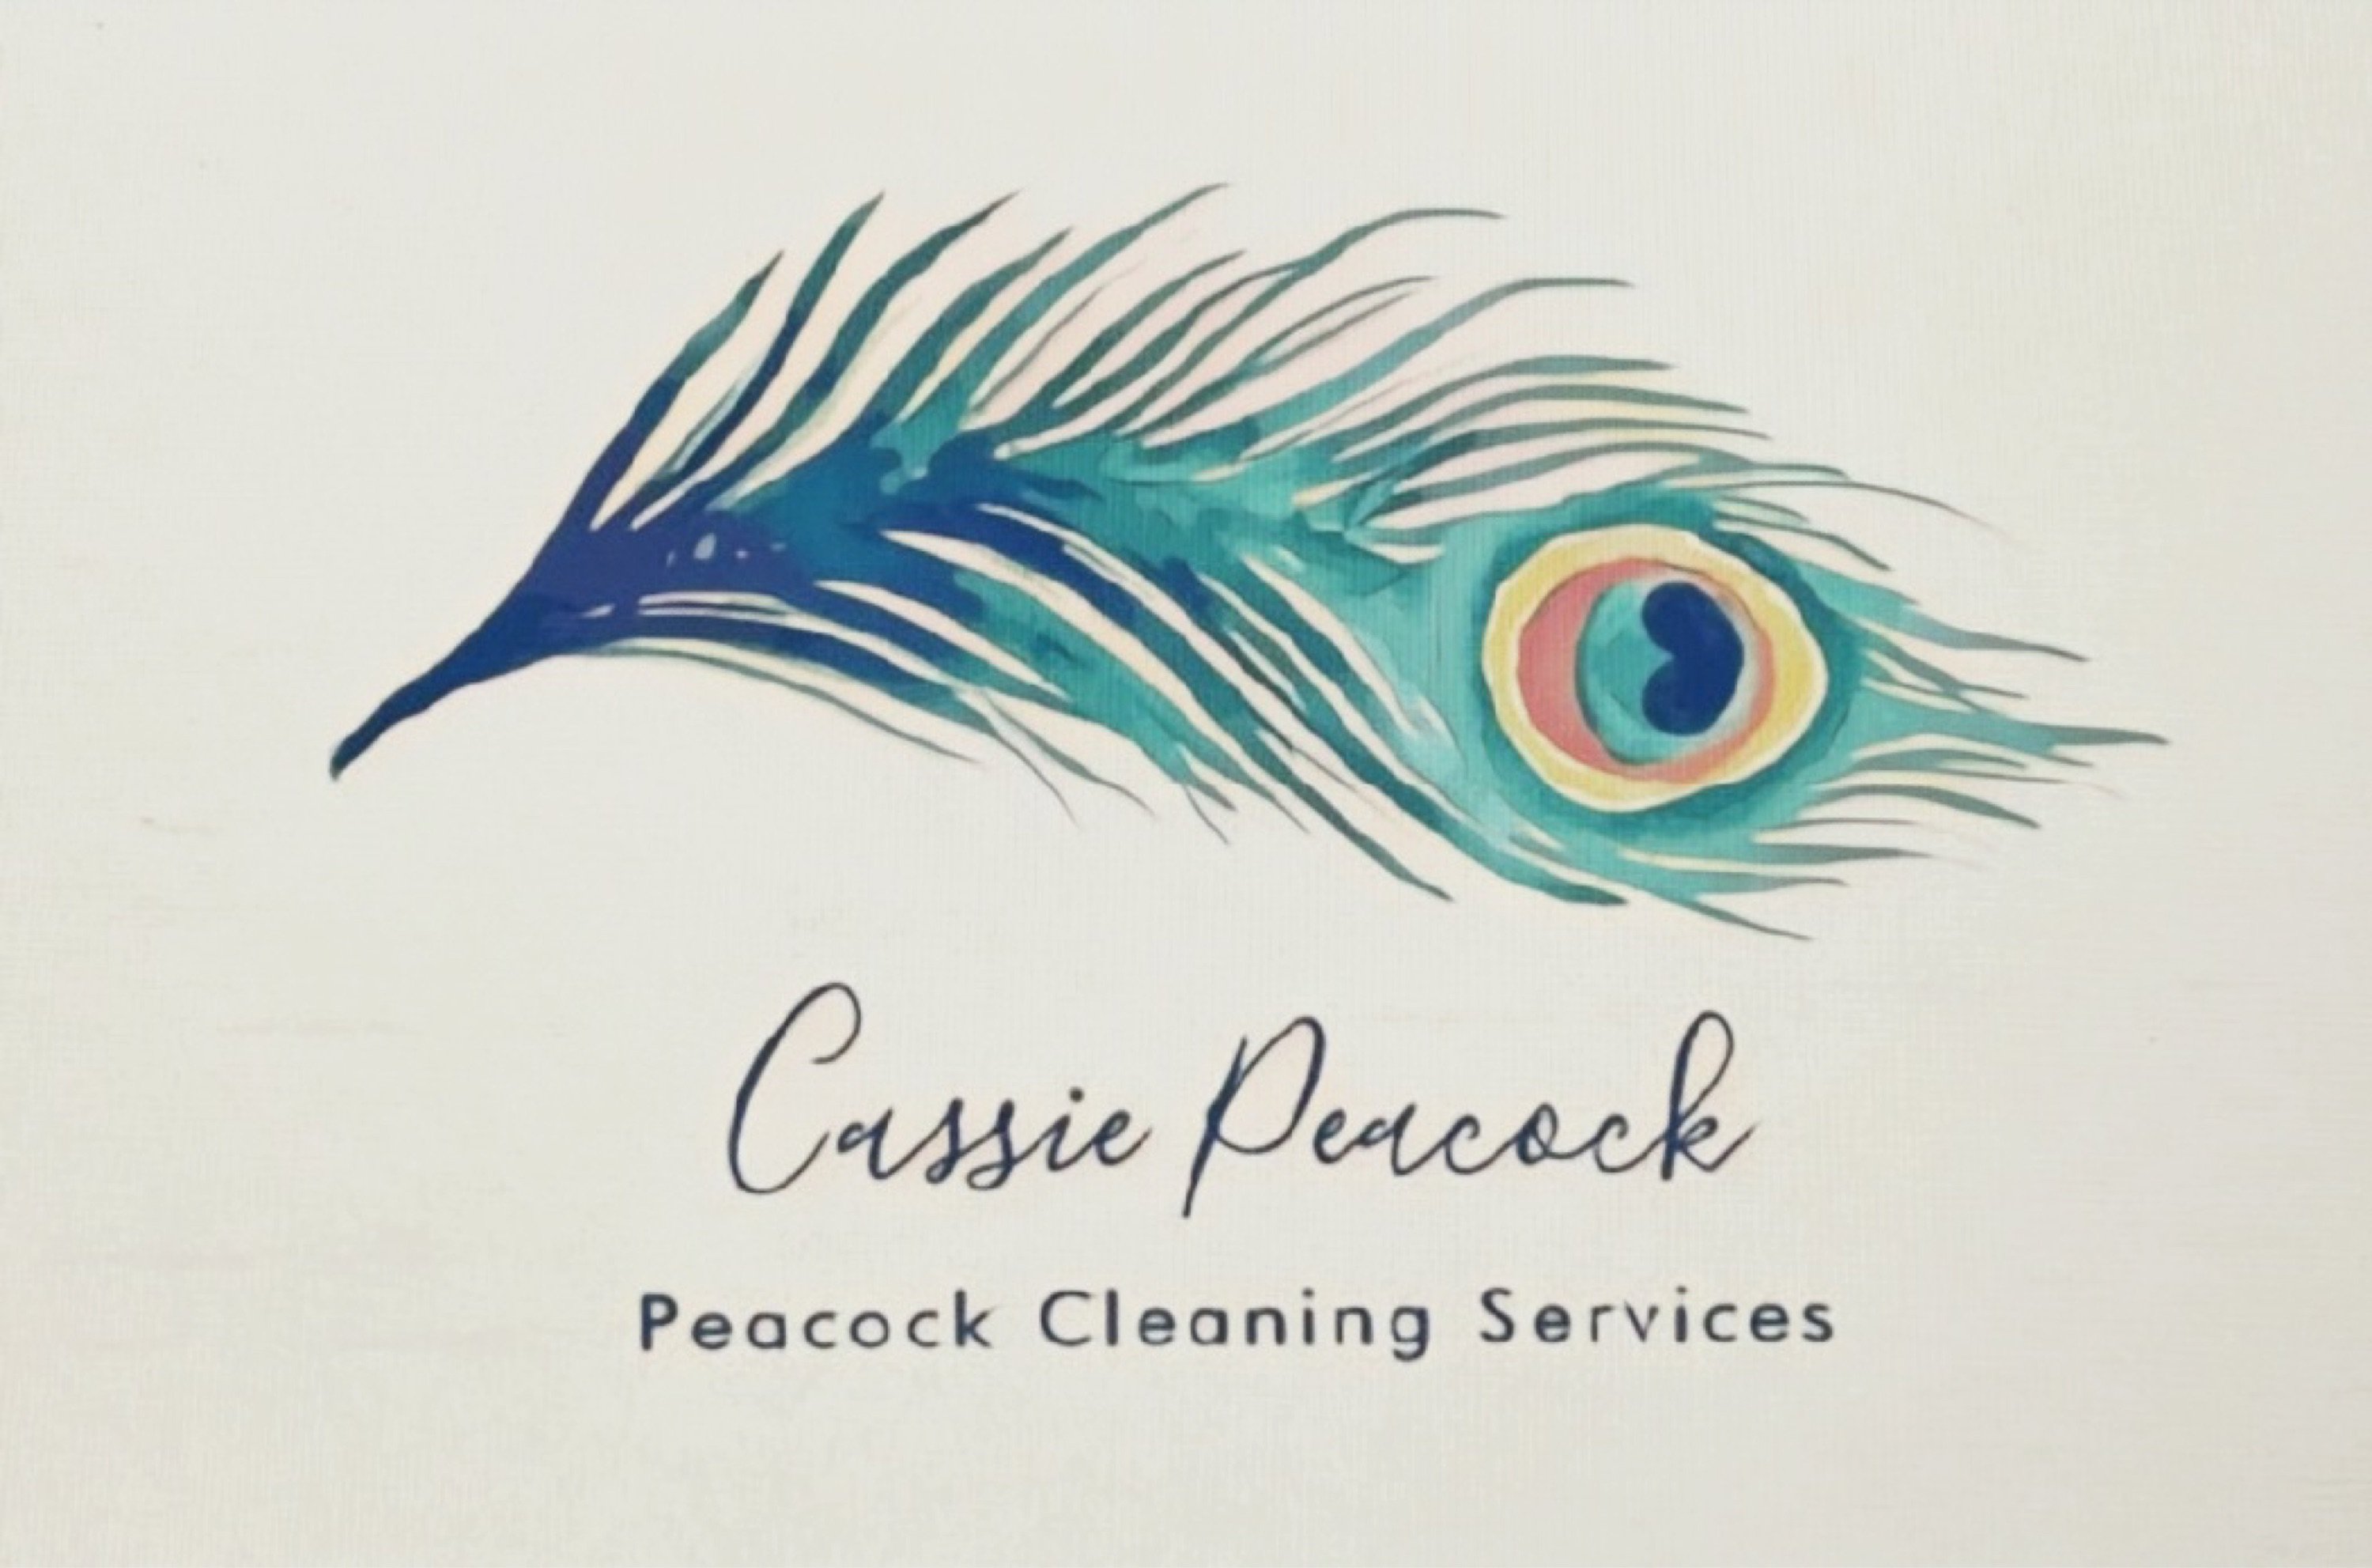 Peacock Cleaning Services Logo